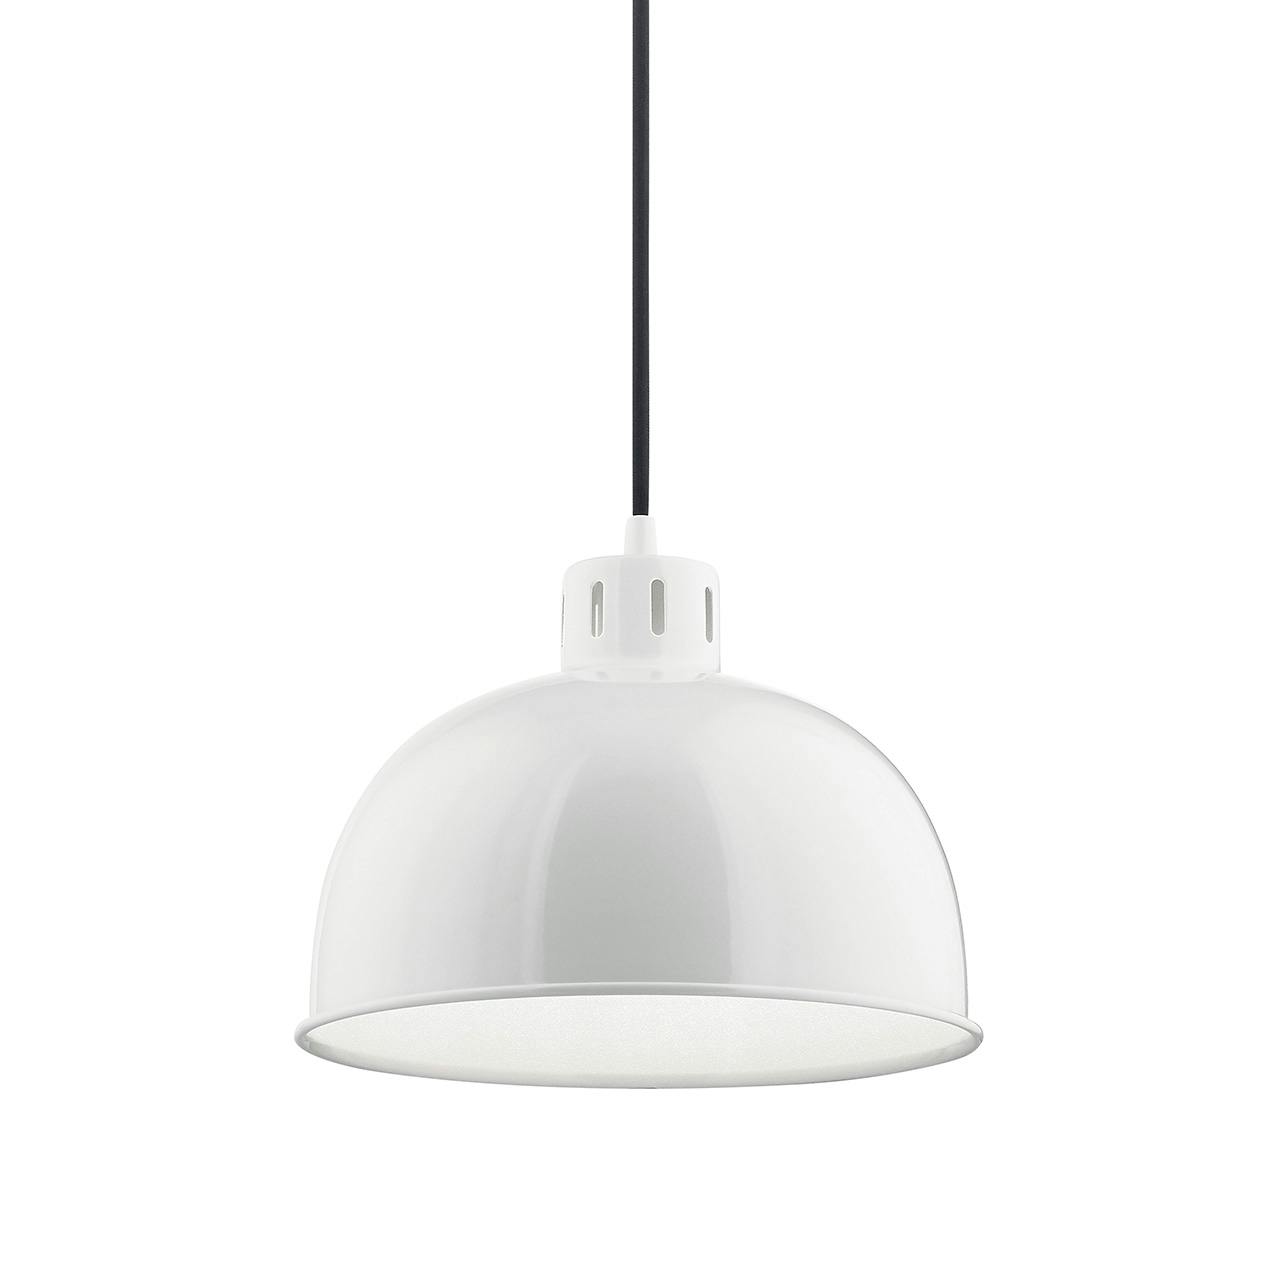 Zailey™ 9" 1 Light Pendant in White without the canopy on a white background